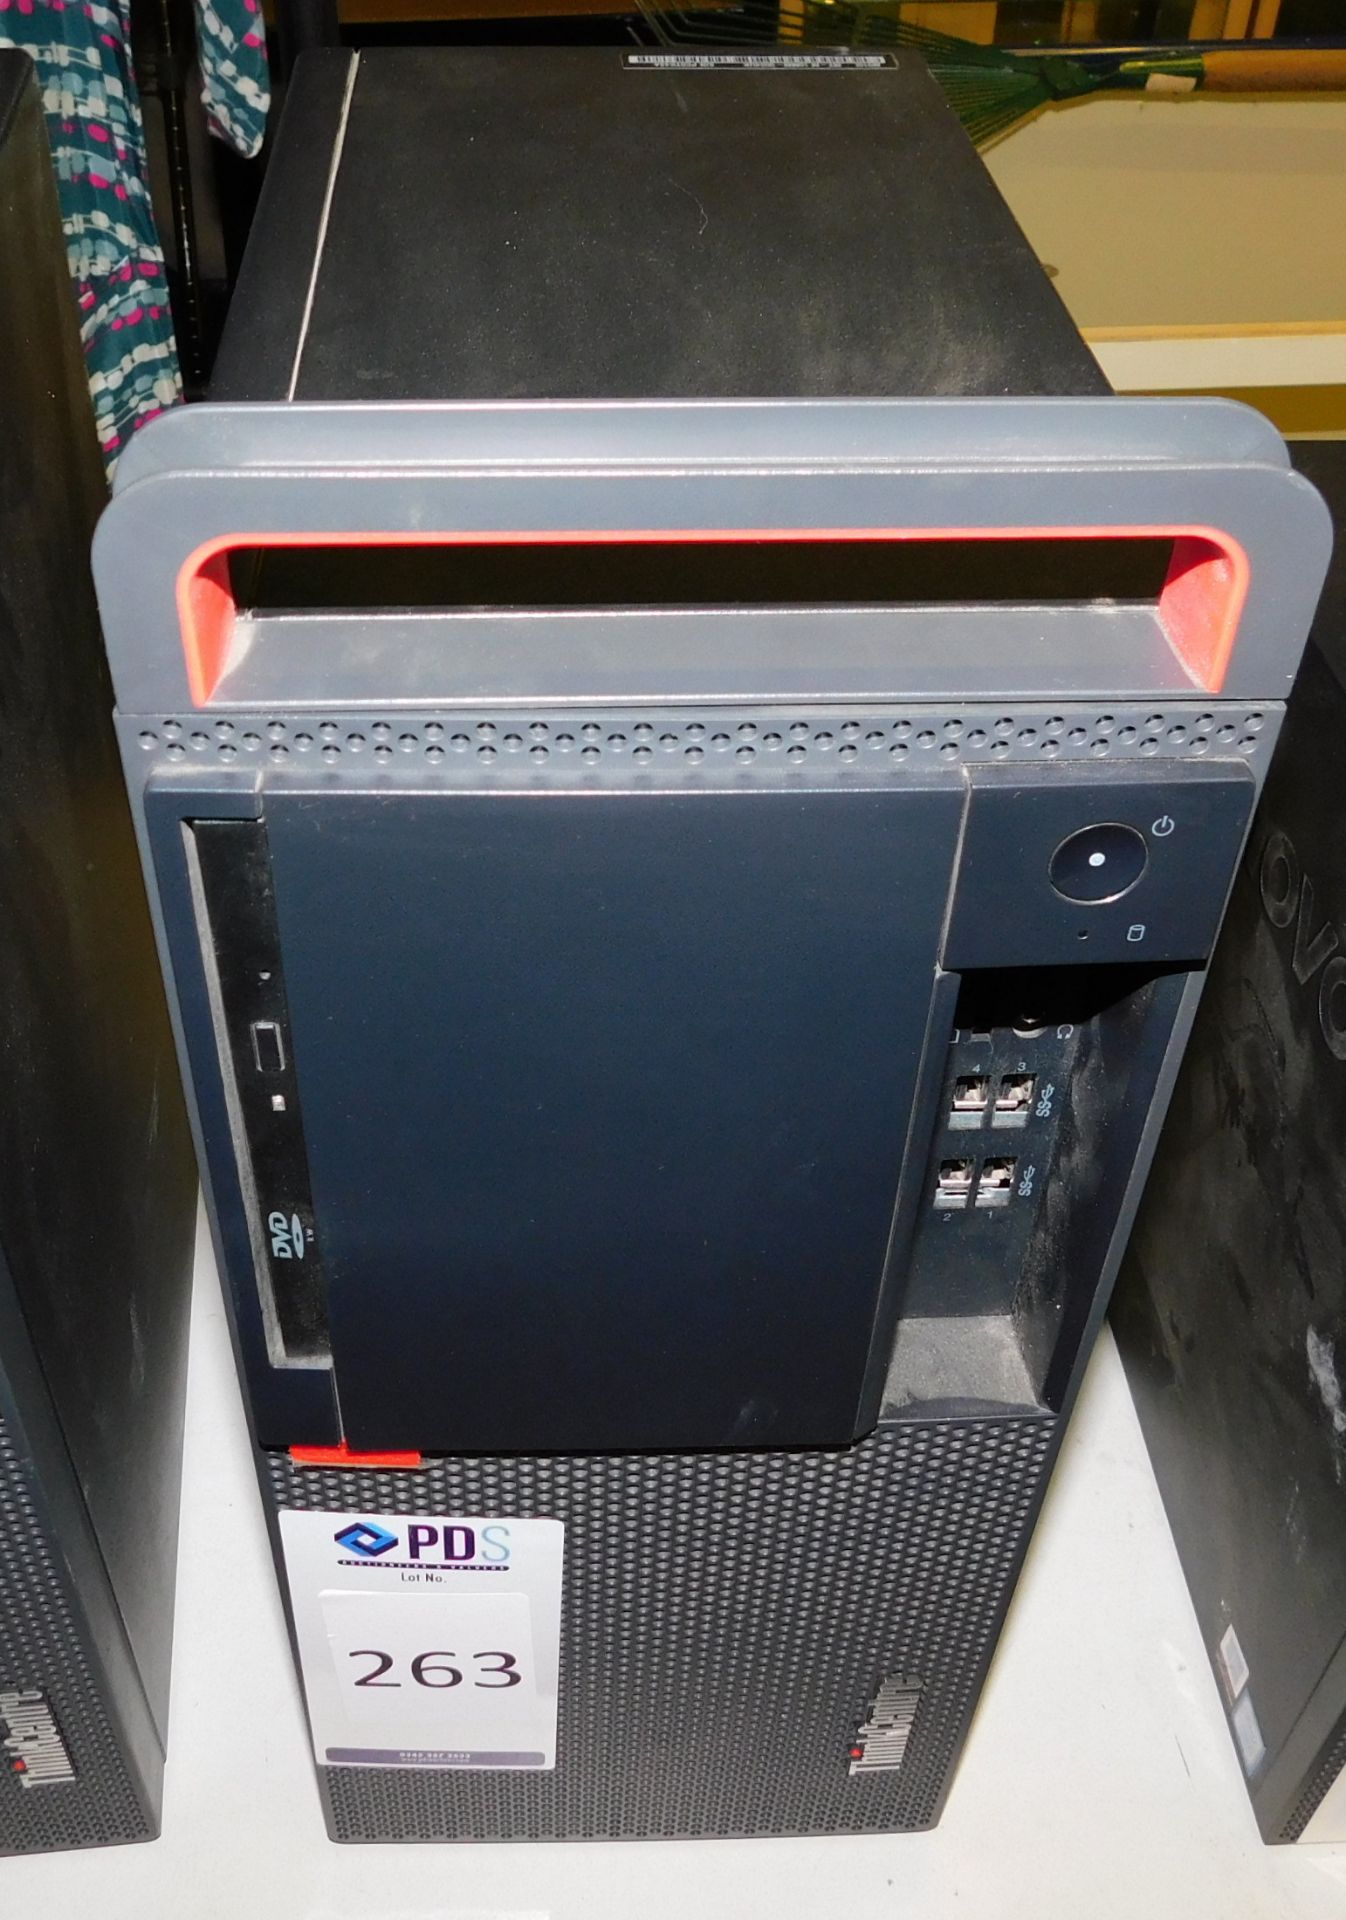 Lenovo ThinkCentre i5 M910t PC (no HDD) (Location: Stockport. Please Refer to General Notes)